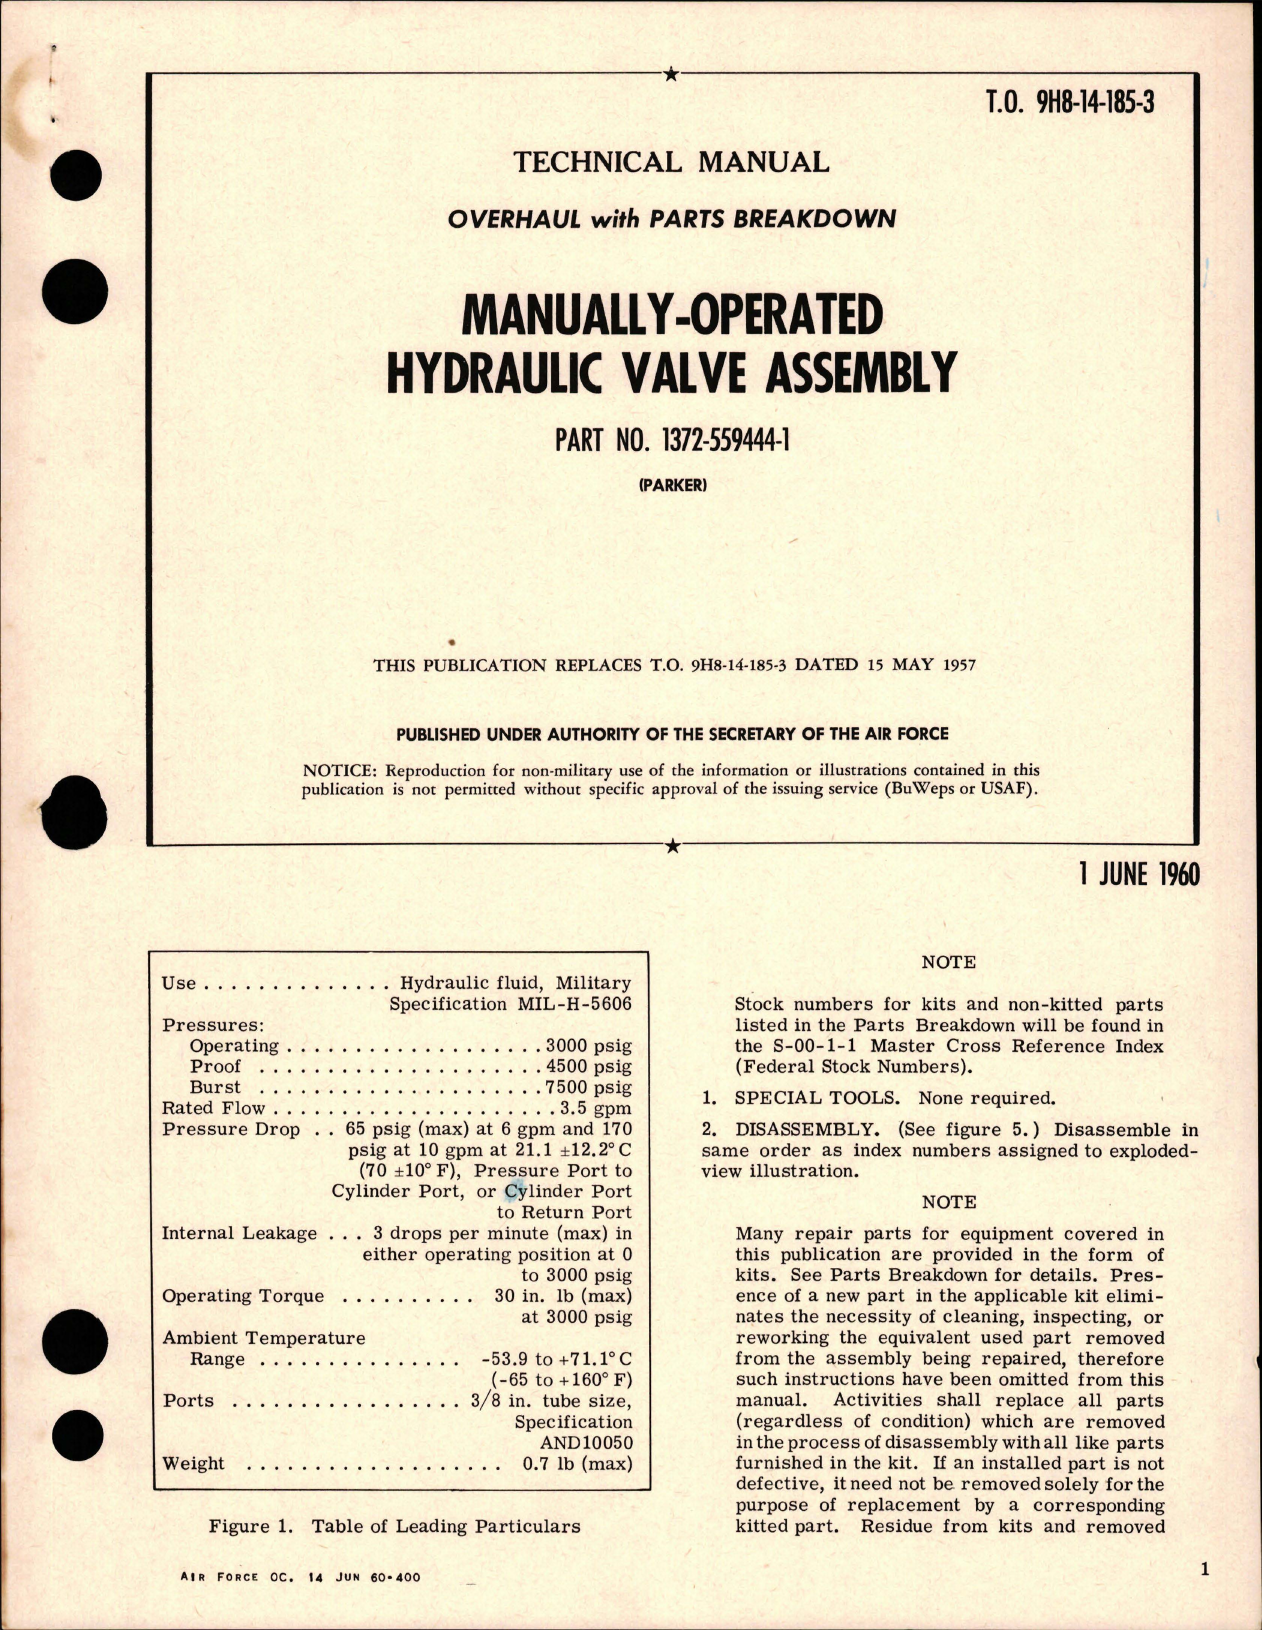 Sample page 1 from AirCorps Library document: Overhaul w Parts for Manually Operated Hydraulic Valve Assembly - Part 1372-559444-1